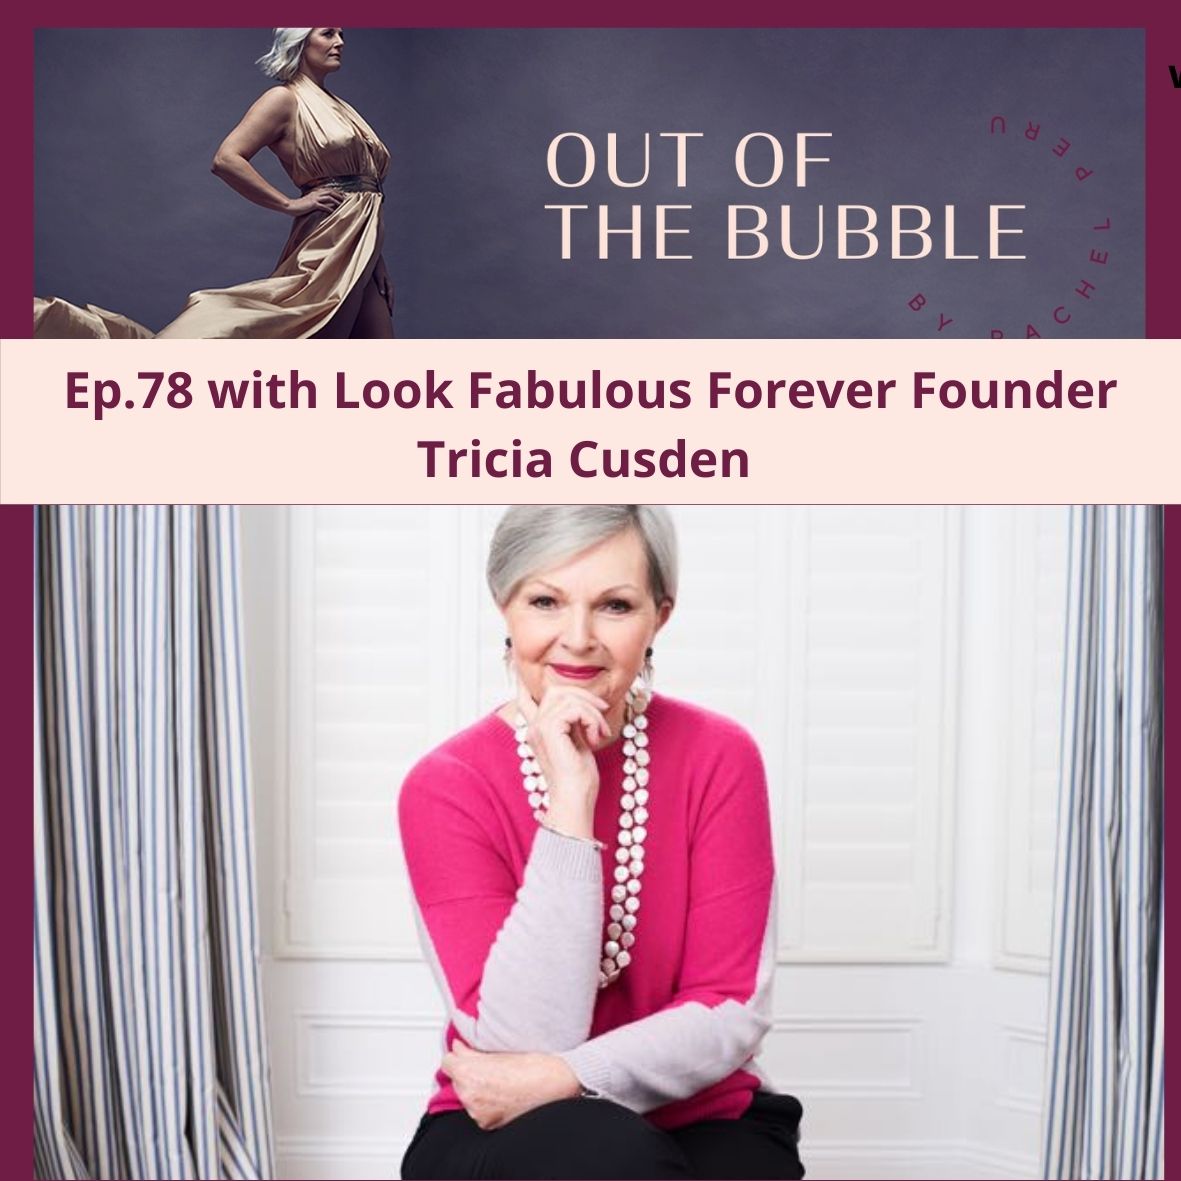 Ep.78 Liberte Free to Be with Tricia Cusden, founder of Look Fabulous Forever